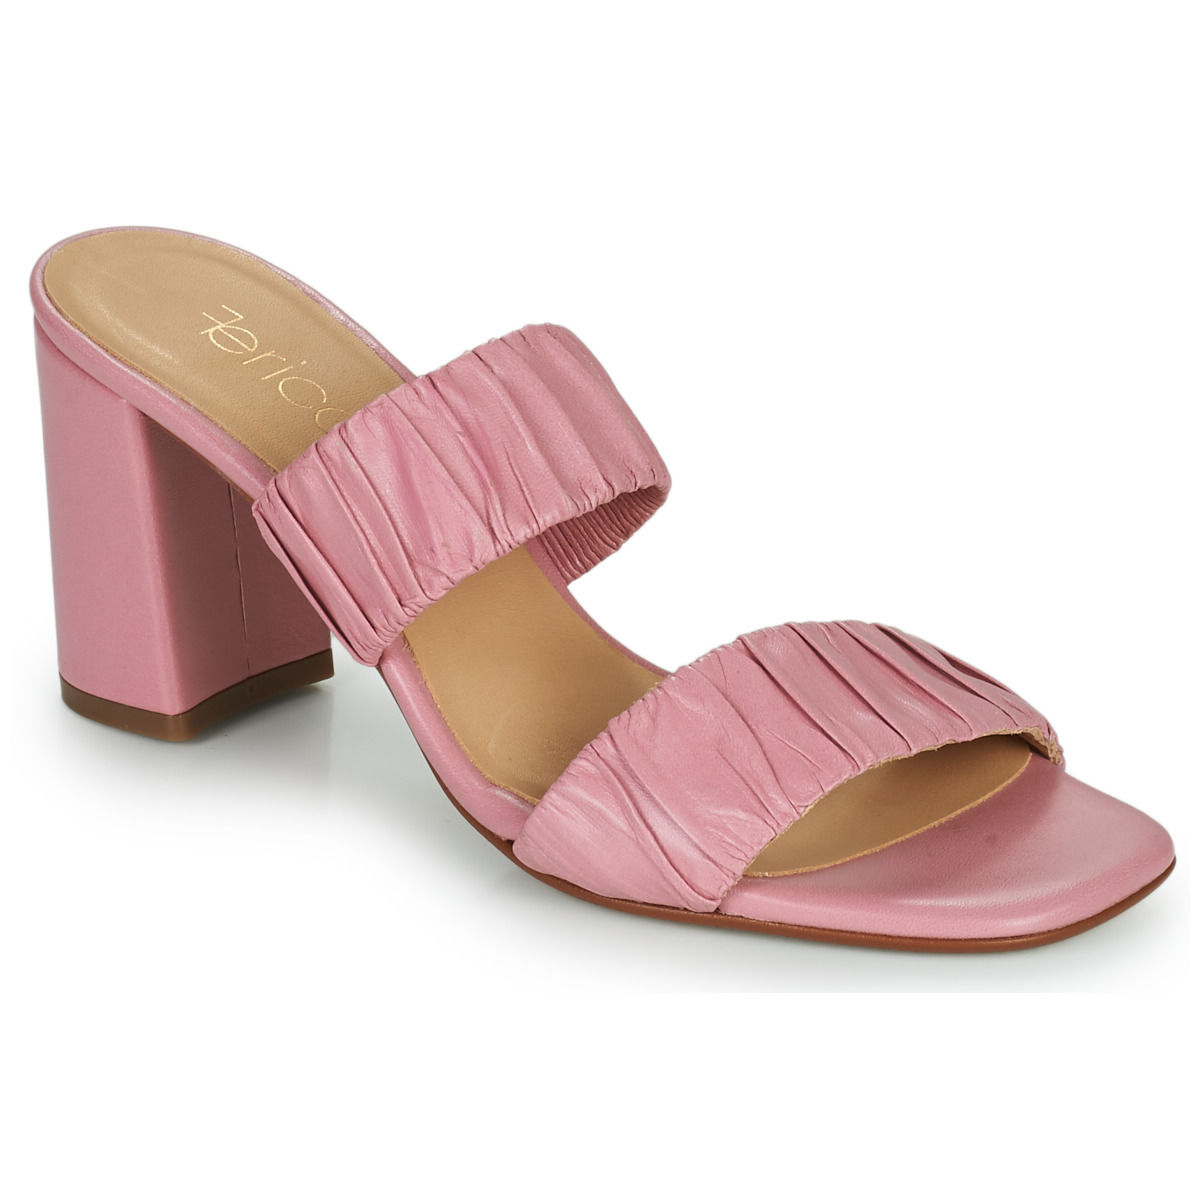 Fericelli Slippers Pink at Spartoo GOOFASH